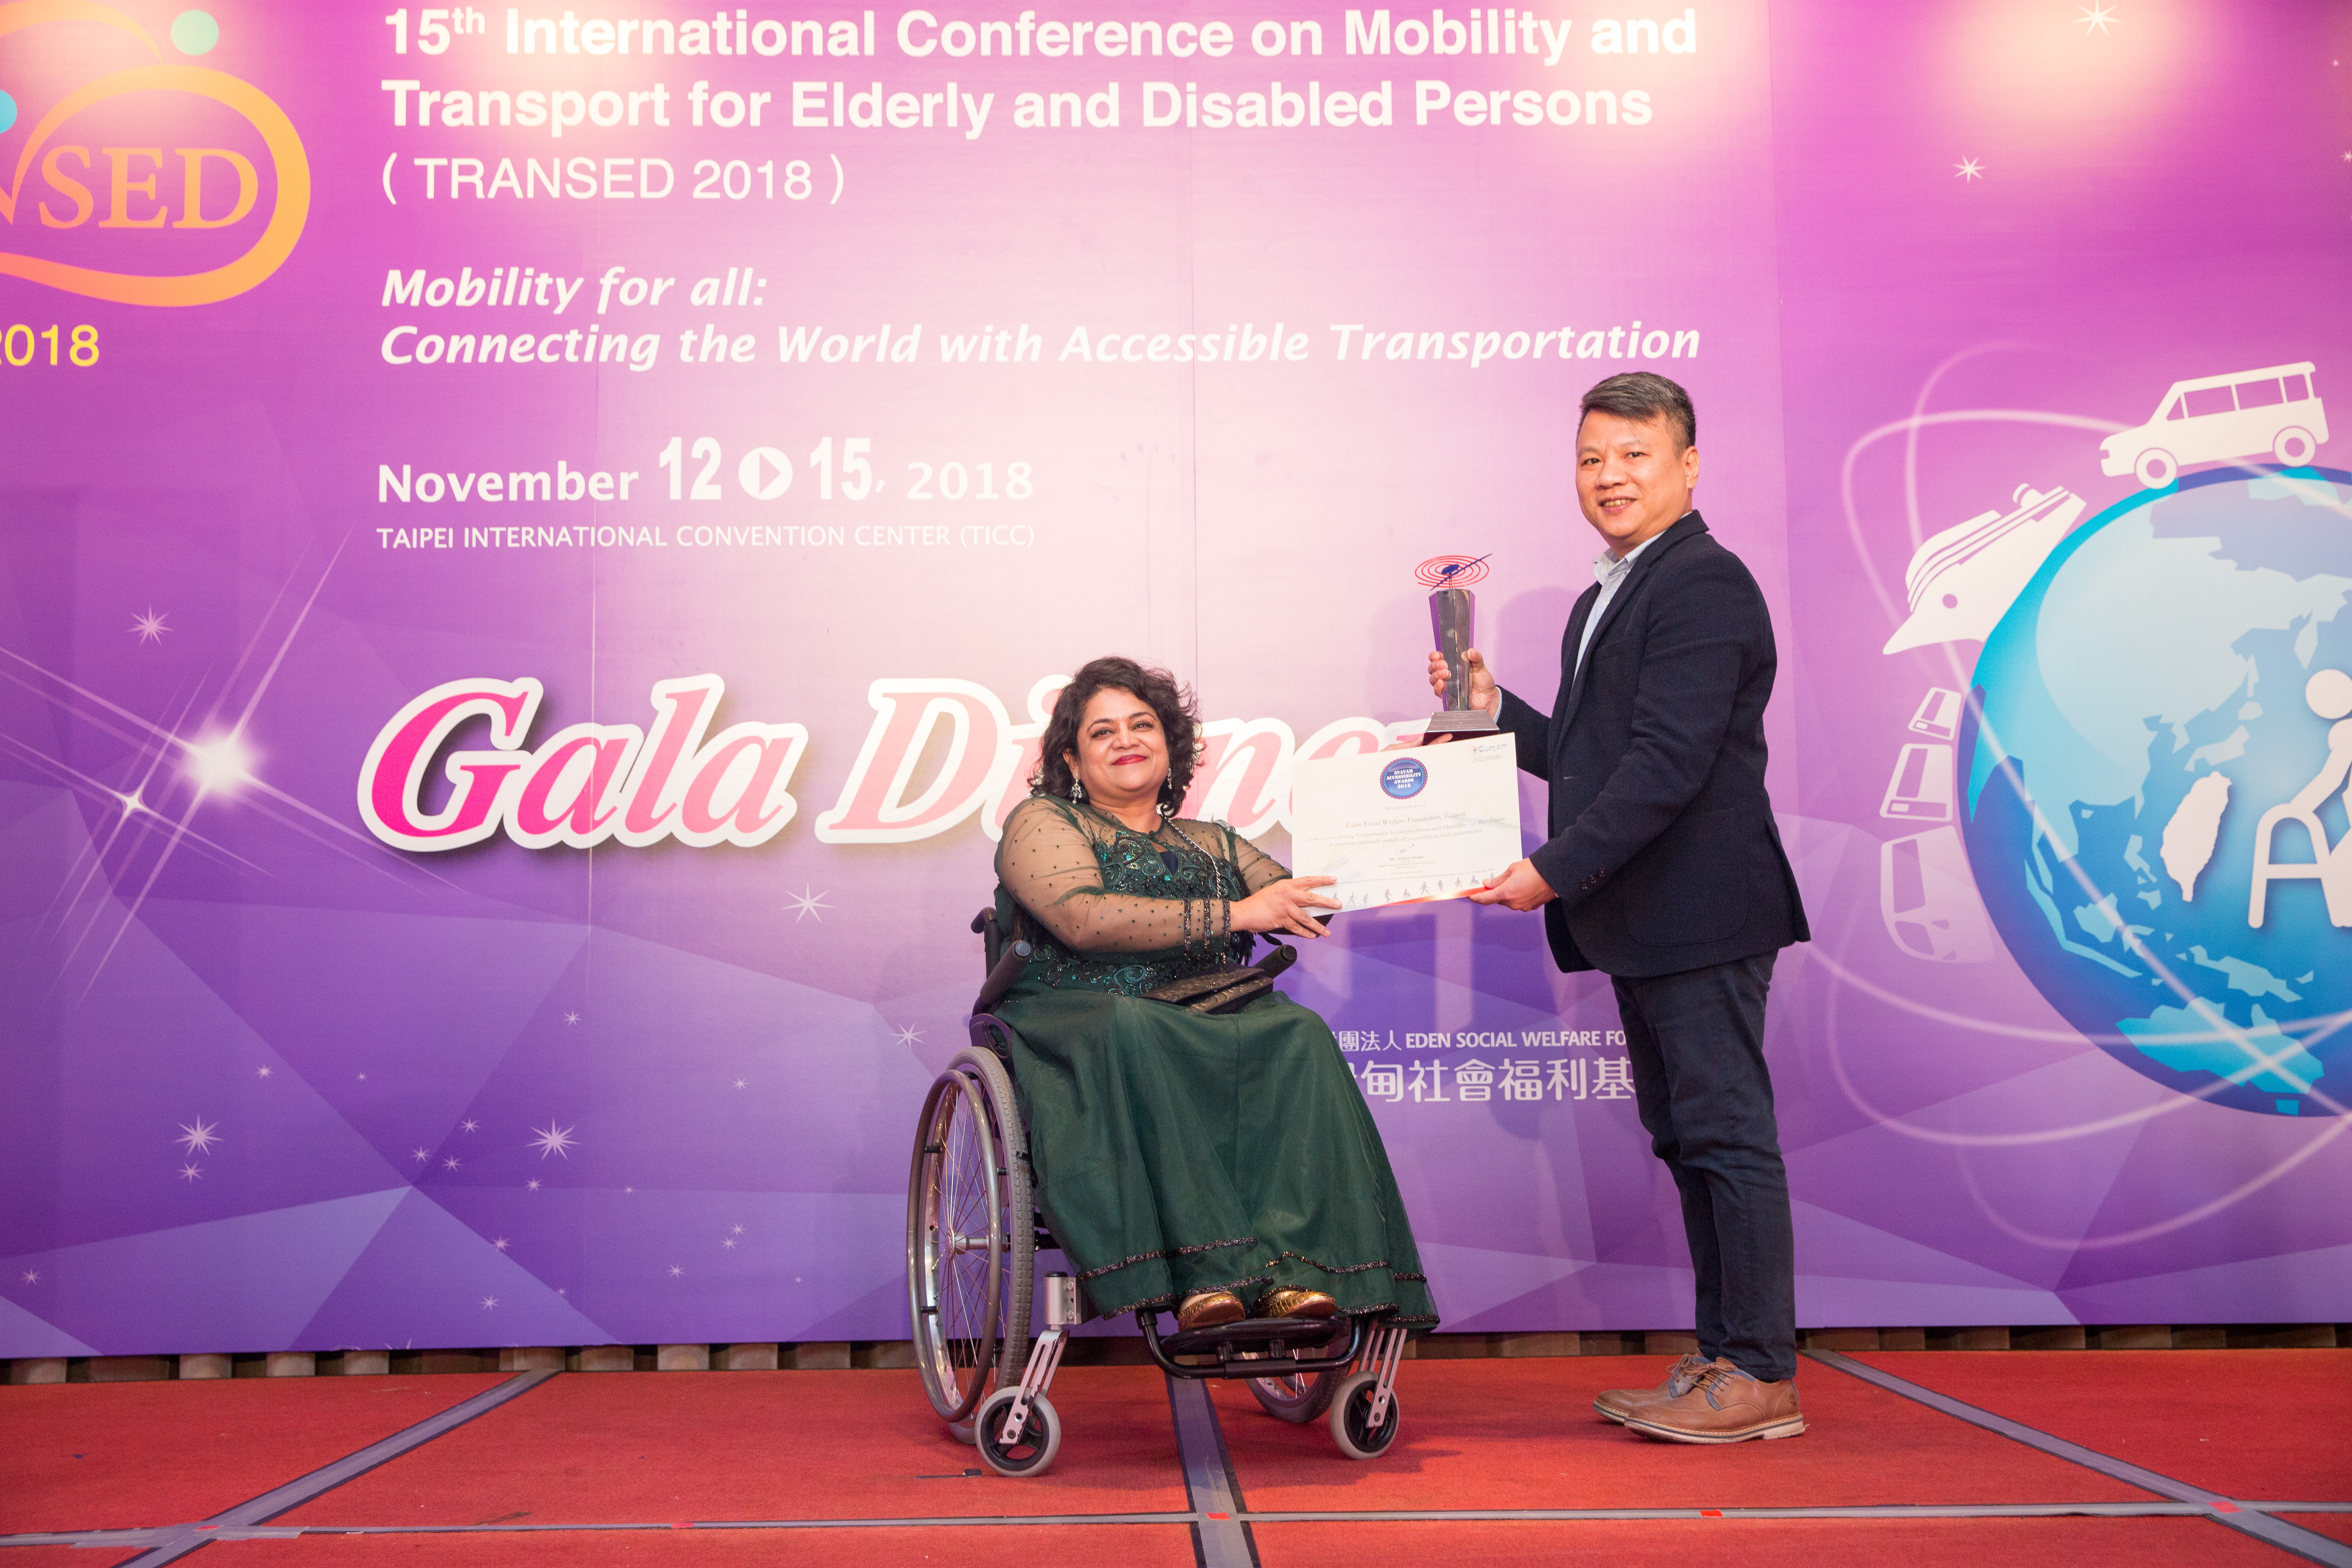 hoto of Mr. Juo-Sung HUANG, CEO, Eden Social Welfare Foundation, Taiwan, receiving Svayam Accessibility Award 2018 from Svayam Founder Ms. Sminu Jindal at Taipei on 14 Nov 2018 on the sidelines of 15thInternational Conference on Mobility and Transport for Elderly and Disabled Persons (TRANSED2018)